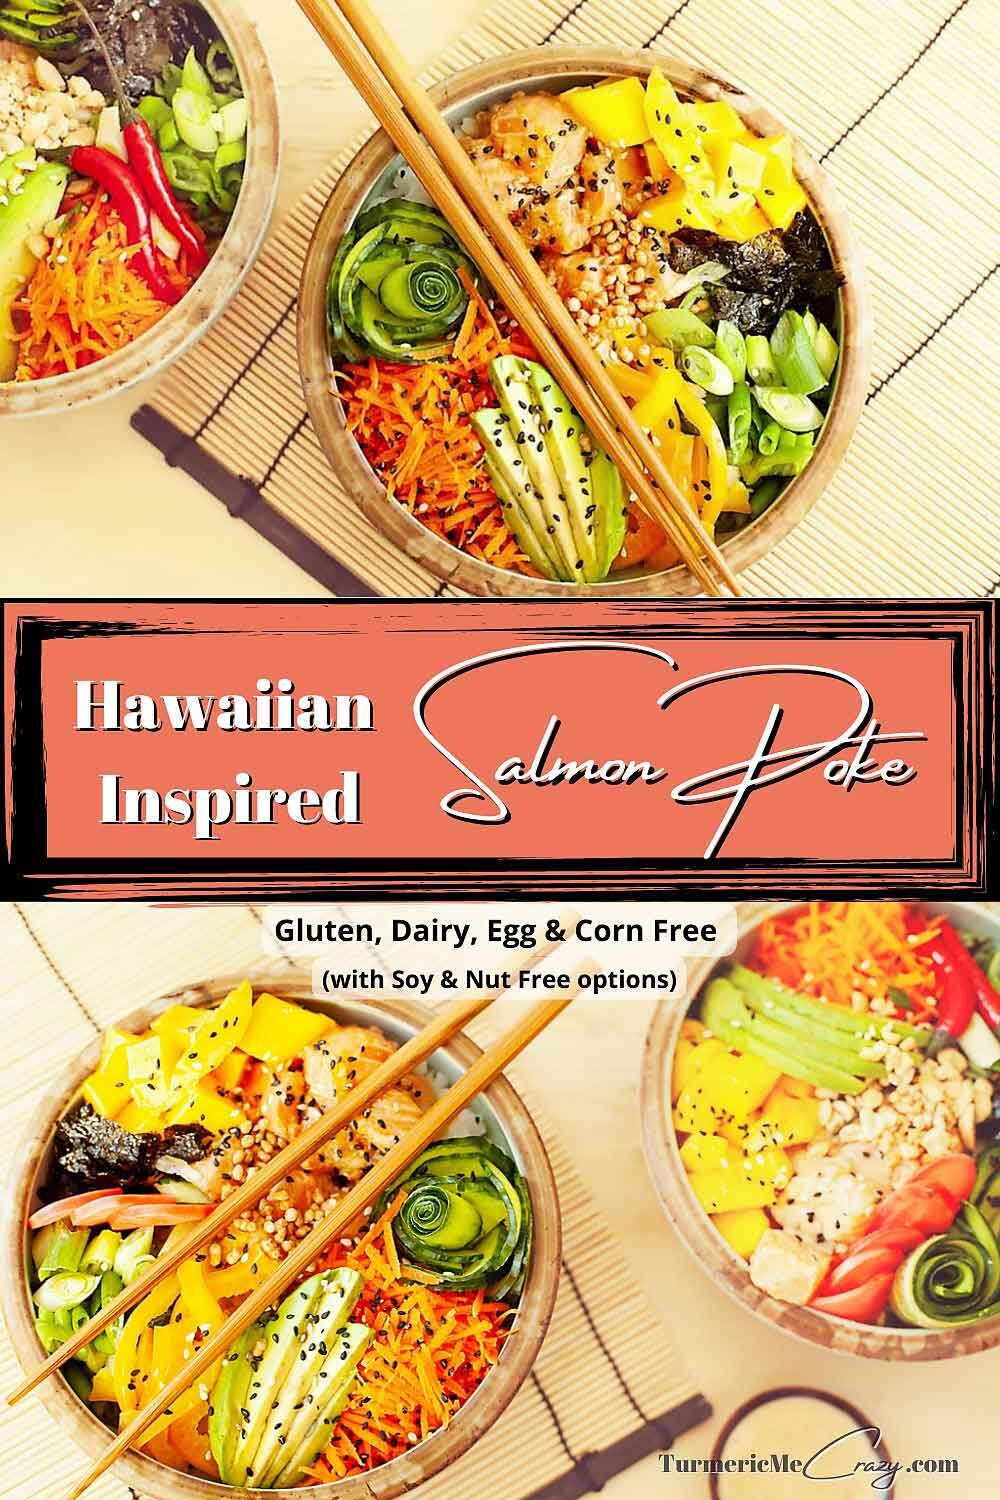 In just 20 minutes, you can excite your taste buds with this super fresh, delightfully delicious and healthy meal! My Hawaiian Salmon Poke Bowl is a quick and easy dinner recipe for the whole family! See my post for how to make it a vegetarian meal!